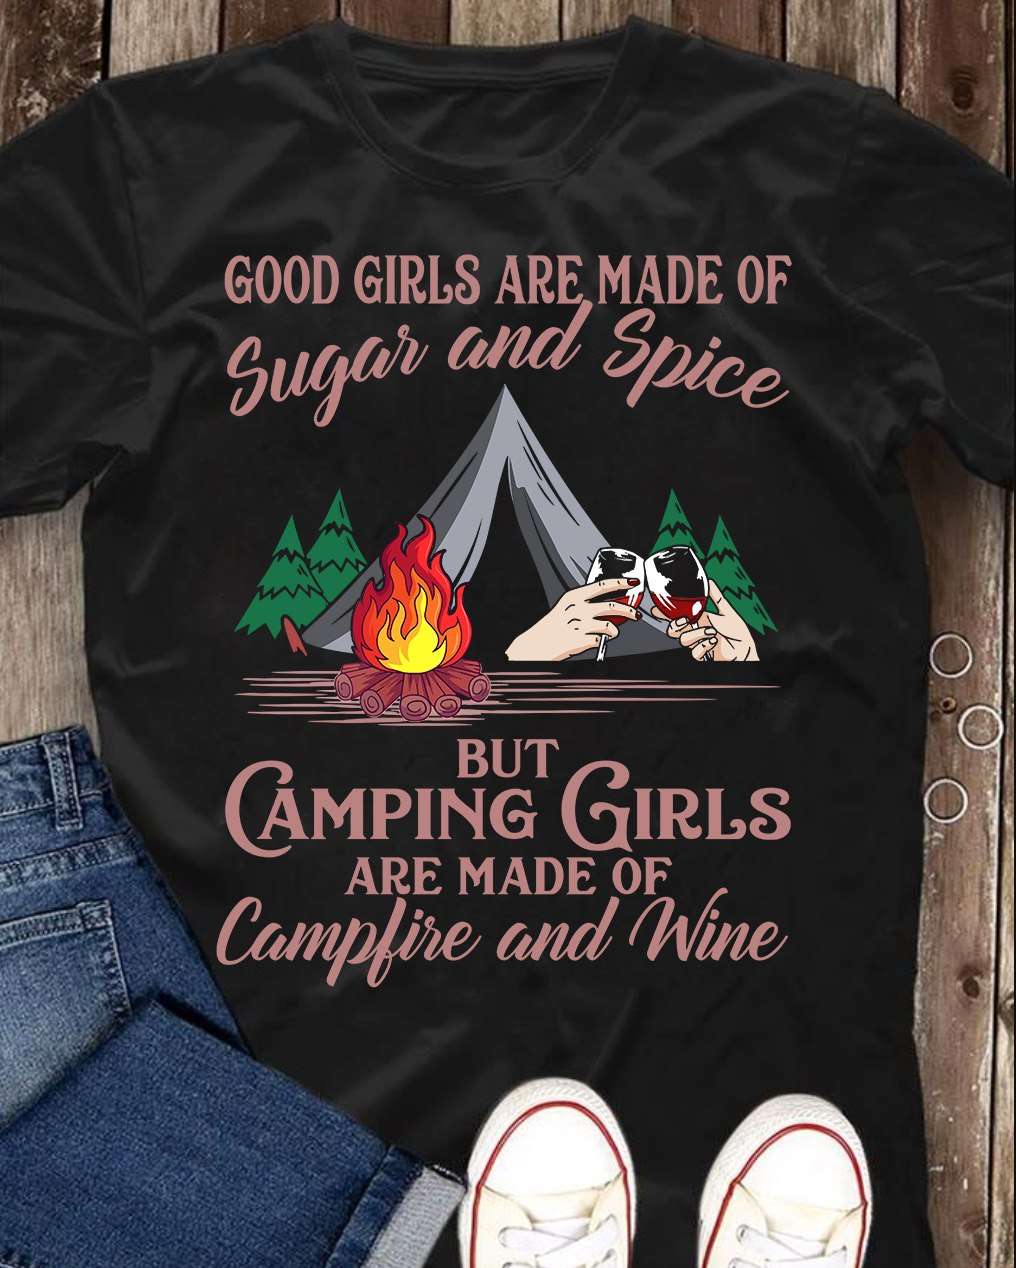 Good girls are made of sugar and spice but camping girls are made of campfire and wine